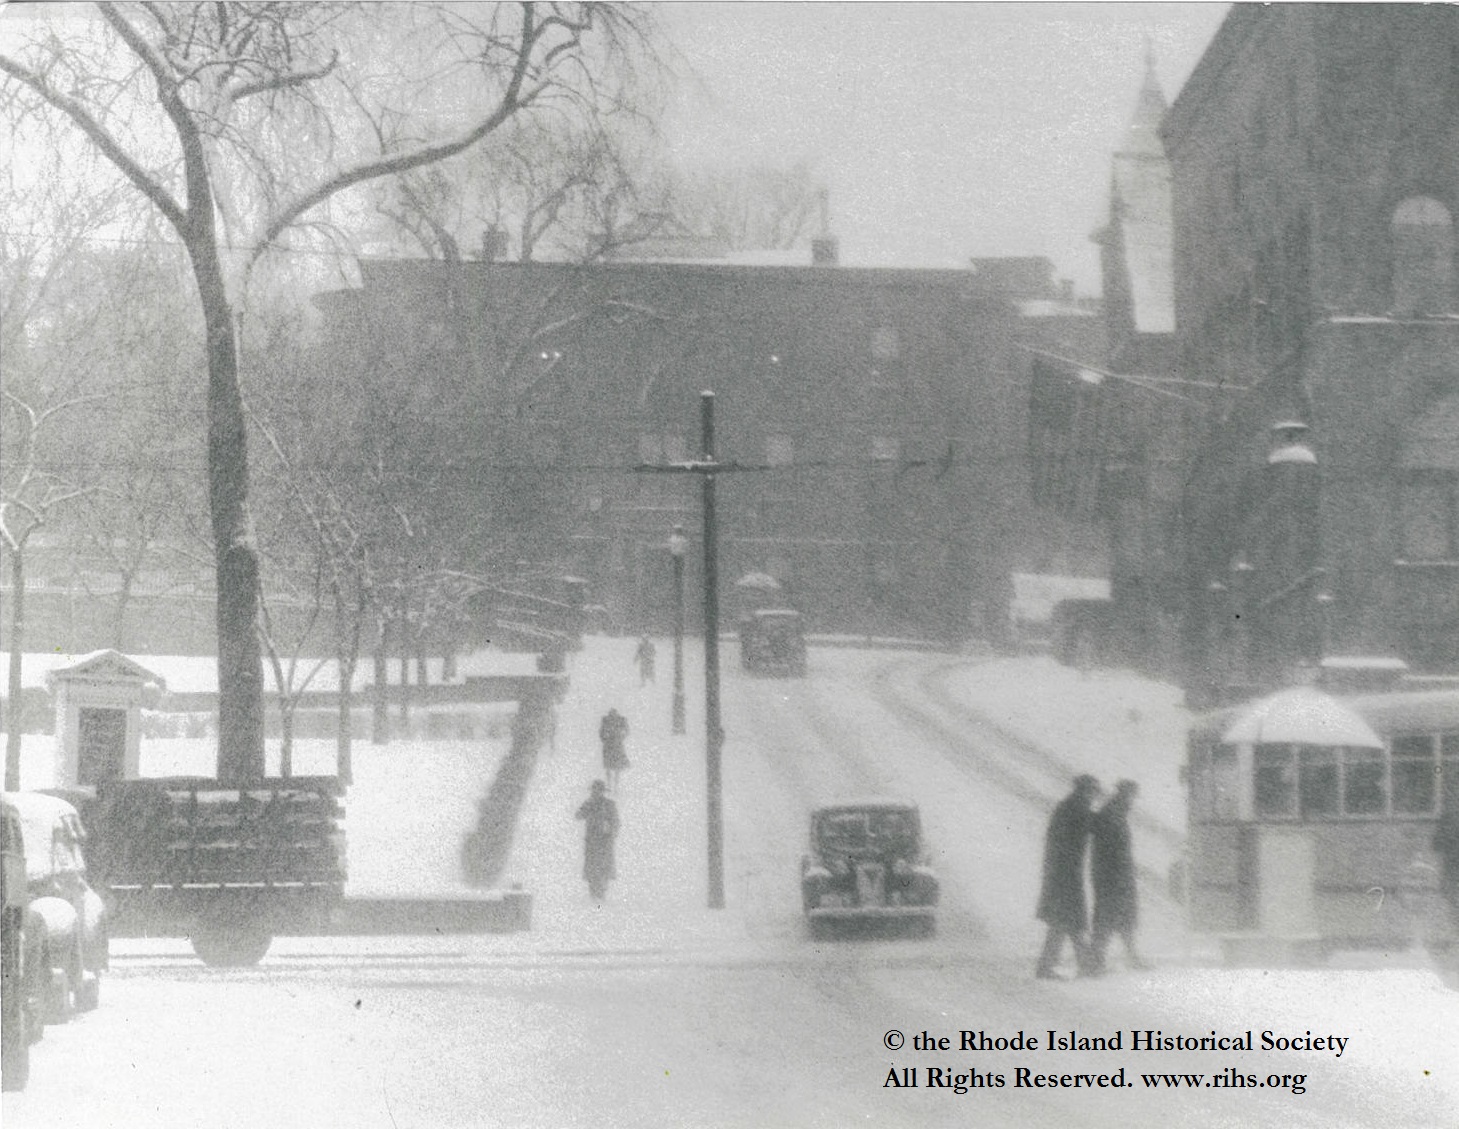 Estey, Charlotte (photographer). [ View up Waterman Avenue from North Main Street in the snow]. Providence, Rhode Island. 1945-1955. Photograph: Silver gelatin. Mary Elizabeth Robinson Research Center, G Lot 144, Charlotte Estey Collection.